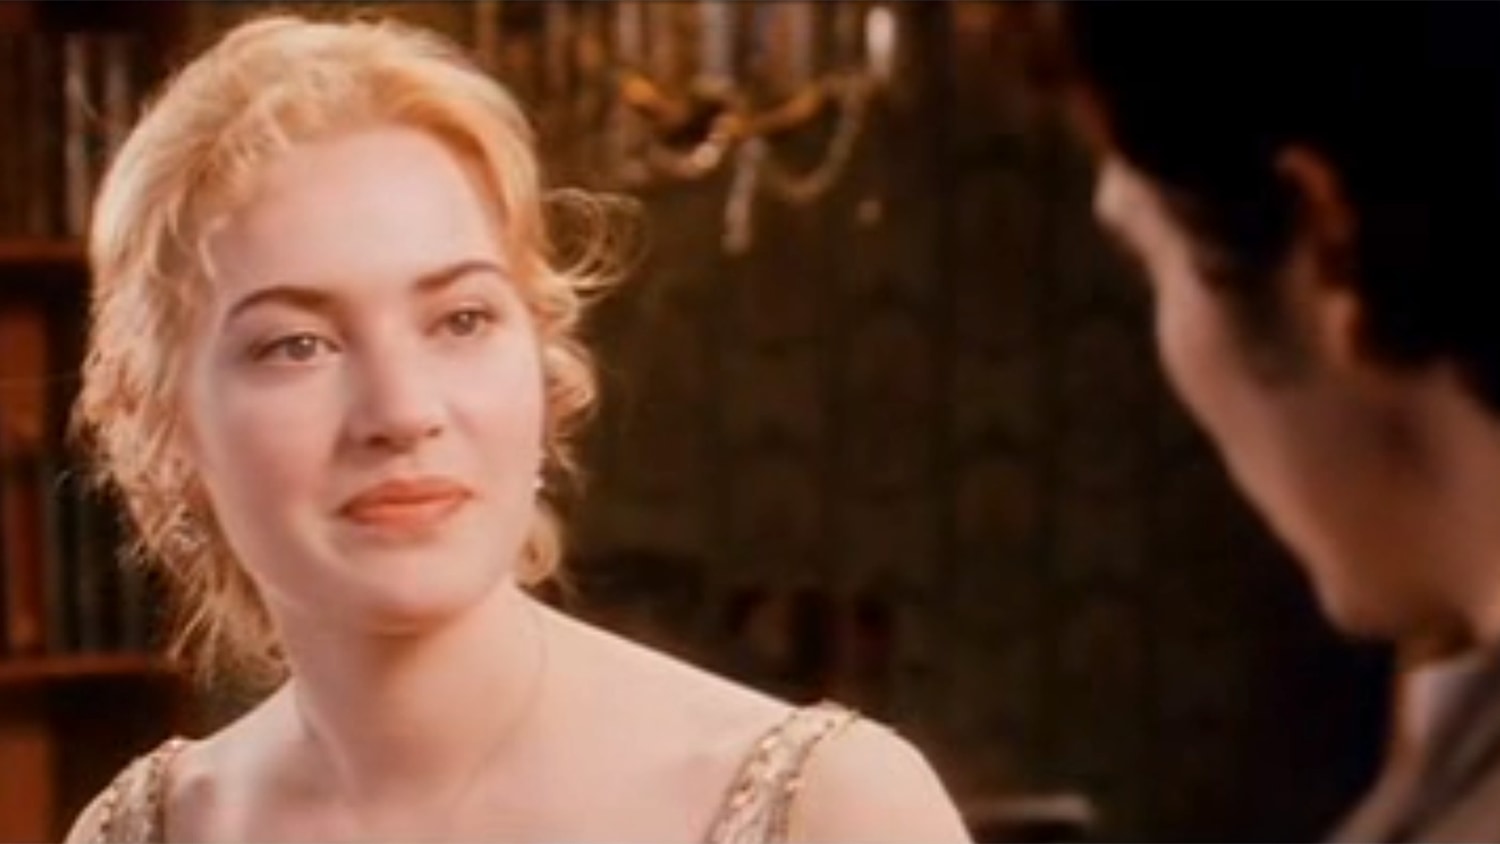 Kate Winslet's screen test for 'Titanic' is magic. But who plays Jack?